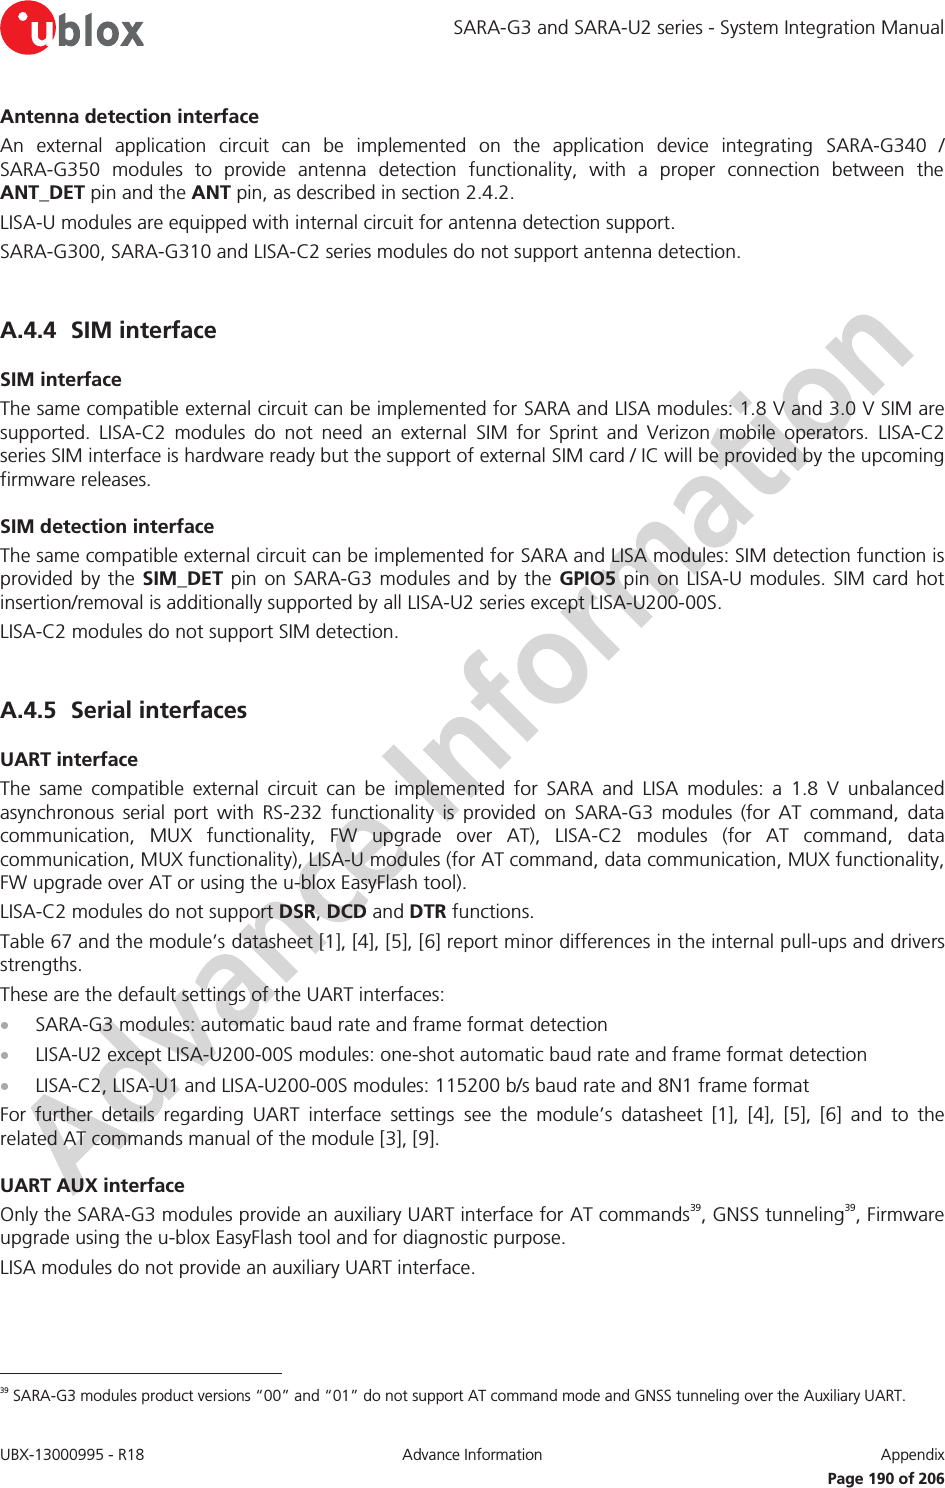 SARA-G3 and SARA-U2 series - System Integration Manual UBX-13000995 - R18  Advance Information  Appendix    Page 190 of 206 Antenna detection interface An external application circuit can be implemented on the application device integrating SARA-G340 / SARA-G350 modules to provide antenna detection functionality, with a proper connection between the ANT_DET pin and the ANT pin, as described in section 2.4.2. LISA-U modules are equipped with internal circuit for antenna detection support. SARA-G300, SARA-G310 and LISA-C2 series modules do not support antenna detection.  A.4.4 SIM interface SIM interface The same compatible external circuit can be implemented for SARA and LISA modules: 1.8 V and 3.0 V SIM are supported. LISA-C2 modules do not need an external SIM for Sprint and Verizon mobile operators. LISA-C2 series SIM interface is hardware ready but the support of external SIM card / IC will be provided by the upcoming firmware releases. SIM detection interface The same compatible external circuit can be implemented for SARA and LISA modules: SIM detection function is provided by the SIM_DET pin on SARA-G3 modules and by the GPIO5 pin on LISA-U modules. SIM card hot insertion/removal is additionally supported by all LISA-U2 series except LISA-U200-00S. LISA-C2 modules do not support SIM detection.  A.4.5 Serial interfaces UART interface The same compatible external circuit can be implemented for SARA and LISA modules: a 1.8 V unbalanced asynchronous serial port with RS-232 functionality is provided on SARA-G3 modules (for AT command, data communication, MUX functionality, FW upgrade over AT), LISA-C2 modules (for AT command, data communication, MUX functionality), LISA-U modules (for AT command, data communication, MUX functionality, FW upgrade over AT or using the u-blox EasyFlash tool). LISA-C2 modules do not support DSR, DCD and DTR functions. Table 67 and the module’s datasheet [1], [4], [5], [6] report minor differences in the internal pull-ups and drivers strengths. These are the default settings of the UART interfaces: x SARA-G3 modules: automatic baud rate and frame format detection x LISA-U2 except LISA-U200-00S modules: one-shot automatic baud rate and frame format detection x LISA-C2, LISA-U1 and LISA-U200-00S modules: 115200 b/s baud rate and 8N1 frame format For further details regarding UART interface settings see the module’s datasheet [1], [4], [5], [6] and to the related AT commands manual of the module [3], [9]. UART AUX interface Only the SARA-G3 modules provide an auxiliary UART interface for AT commands39, GNSS tunneling39, Firmware upgrade using the u-blox EasyFlash tool and for diagnostic purpose. LISA modules do not provide an auxiliary UART interface.                                                       39 SARA-G3 modules product versions “00” and “01” do not support AT command mode and GNSS tunneling over the Auxiliary UART. 